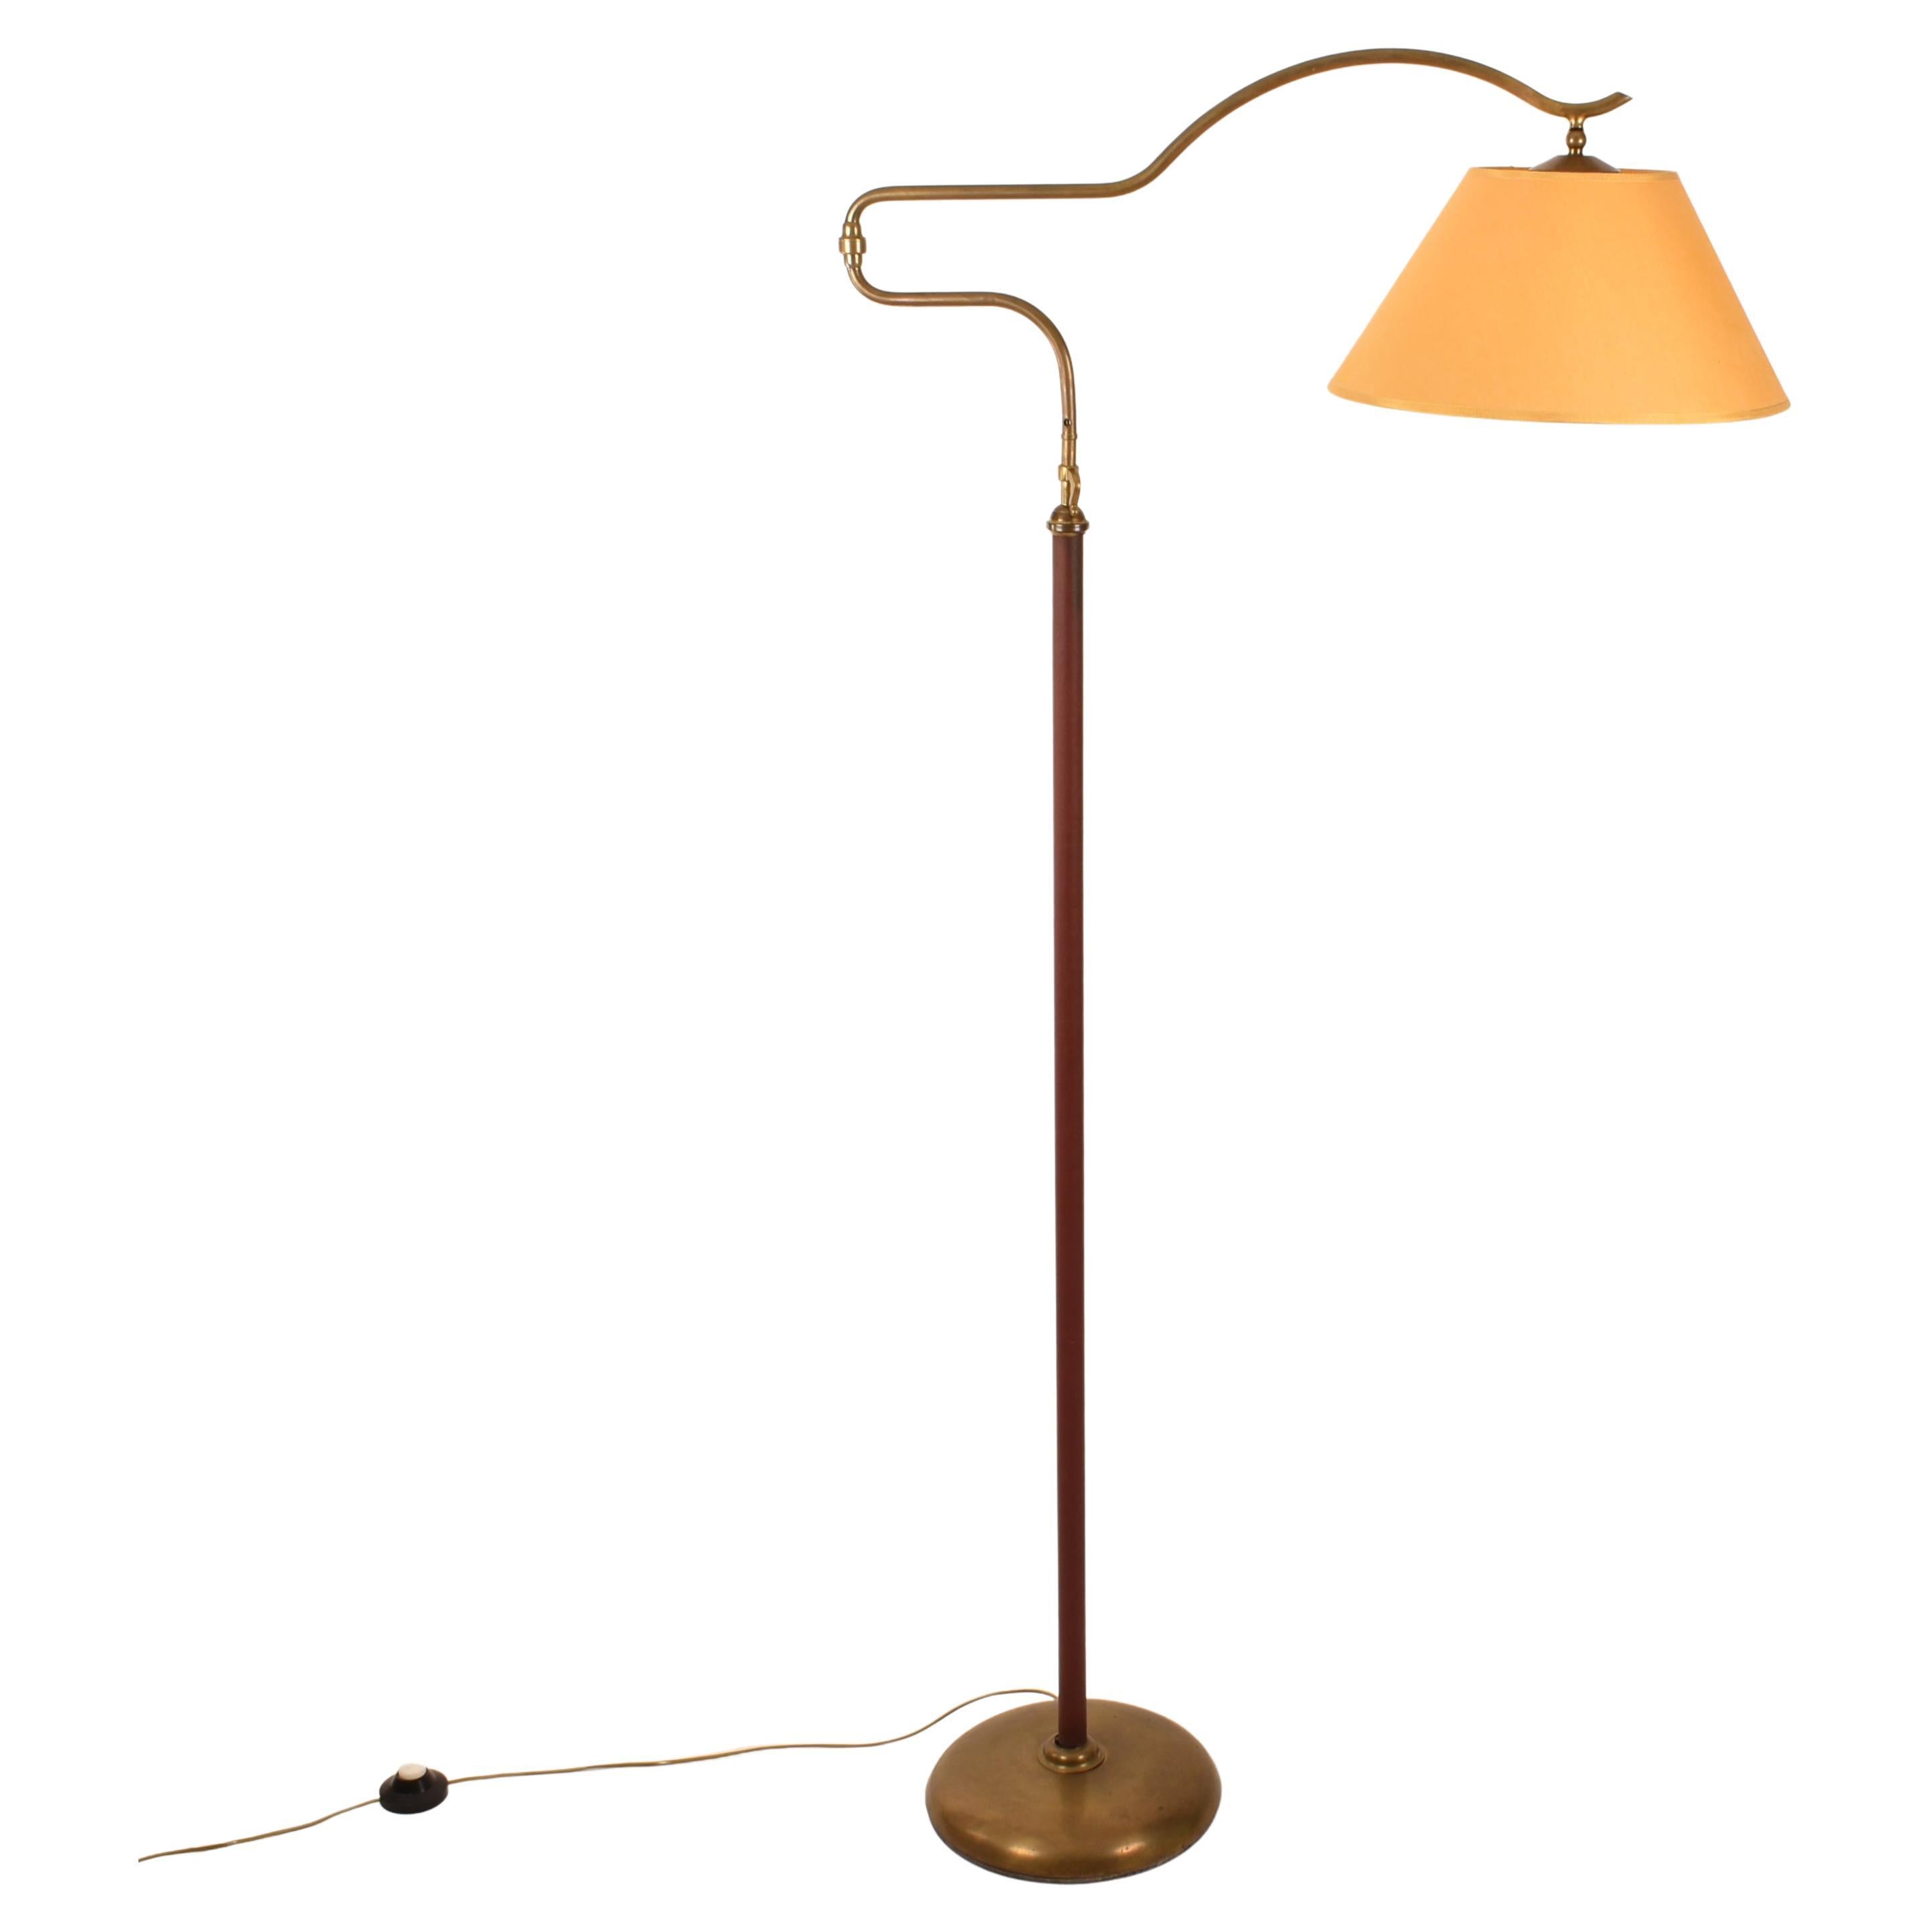 Arredoluce Adjustable Brass and Leather Floor Lamp, Italy, 1940